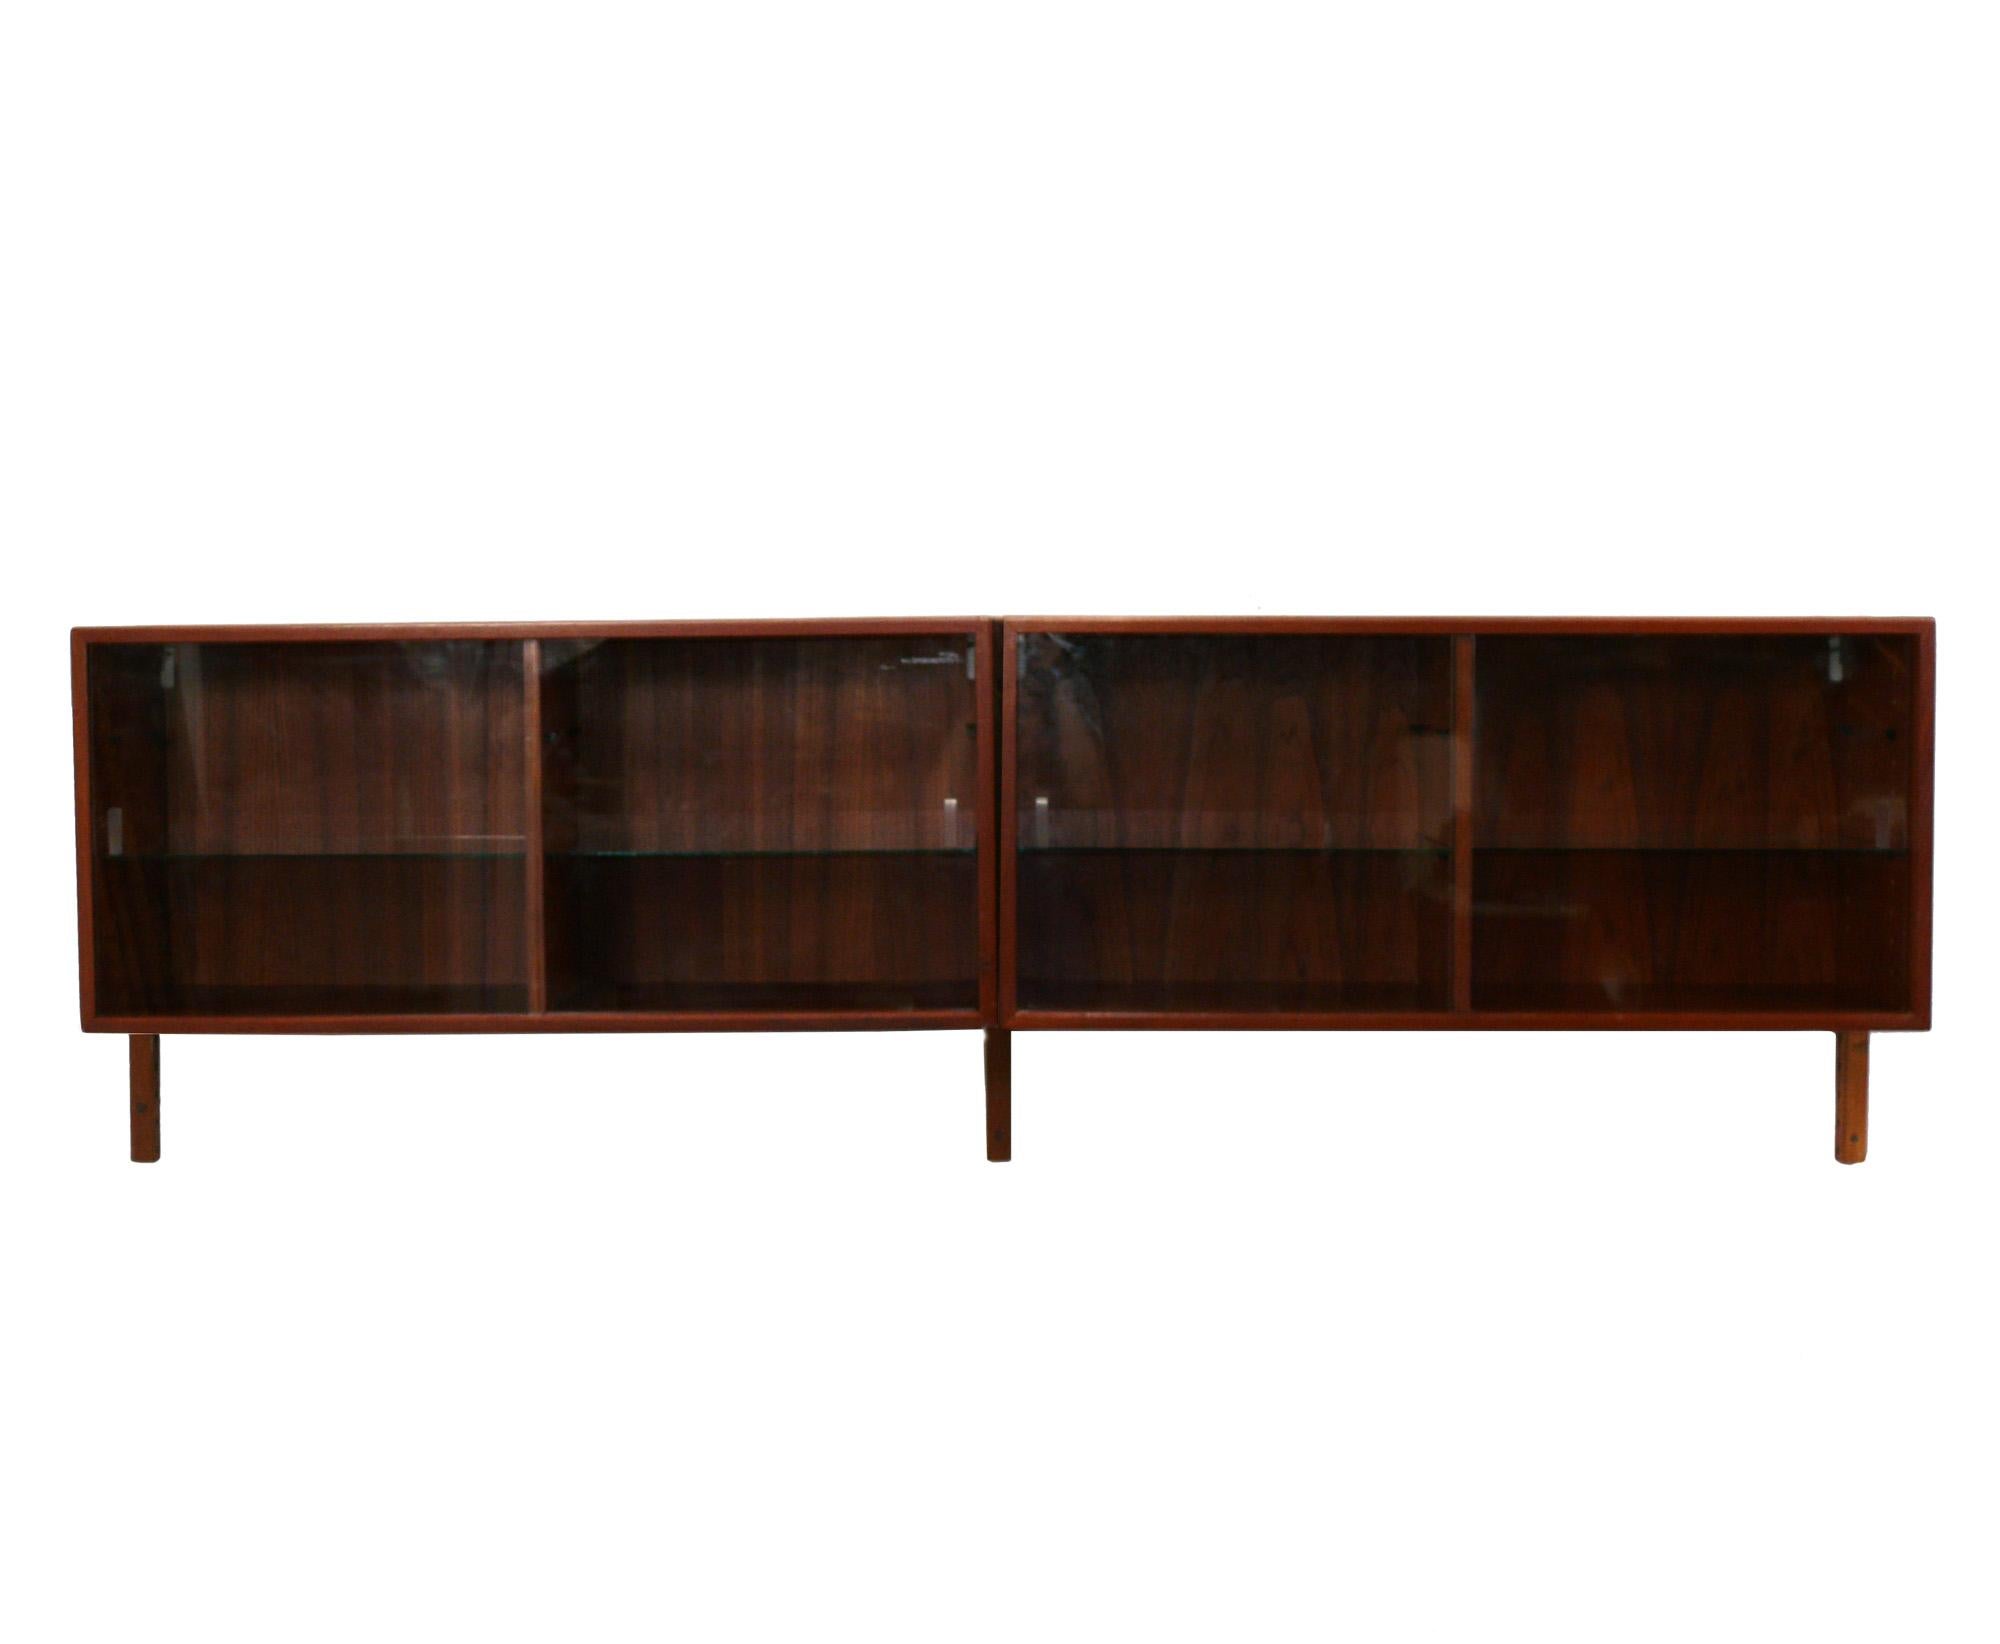 Danish Modern Teak Bookshelf Wall Unit, Denmark, circa 1960s. This piece is a versatile size and can be used as a bookshelf, bar, media cabinet, vitrine, or wall cabinet. It consists of three wall mounted brackets, two cabinets with four sliding